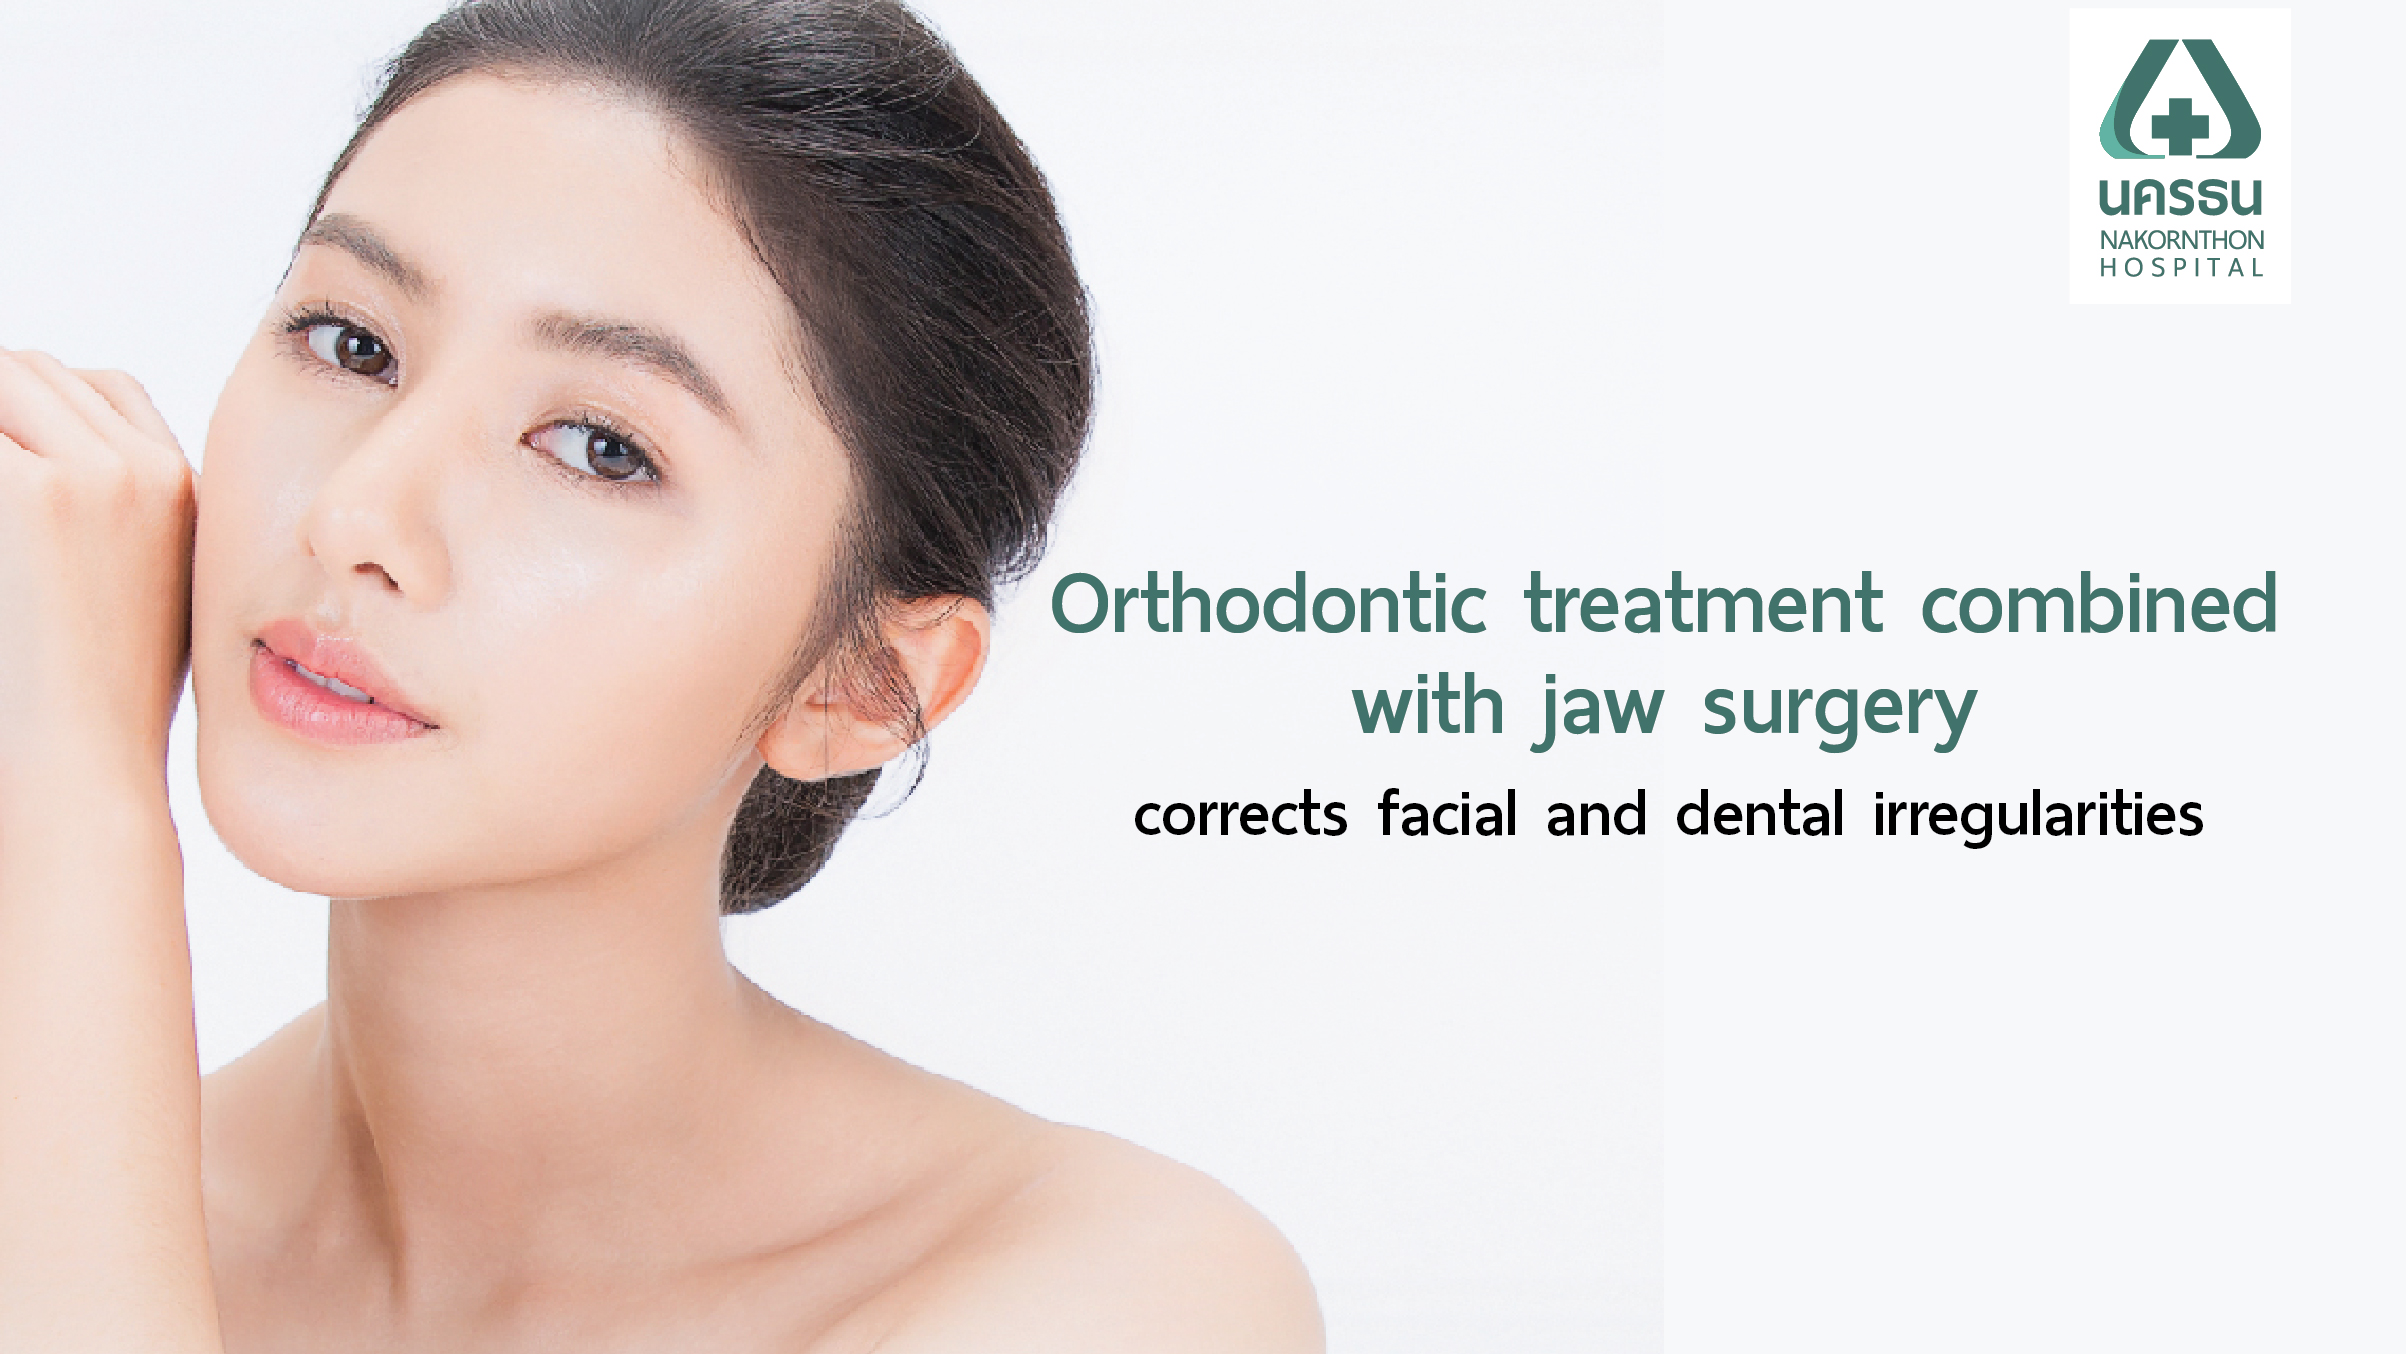 Orthodontic treatment combined with jaw surgery corrects facial and dental irregularities.